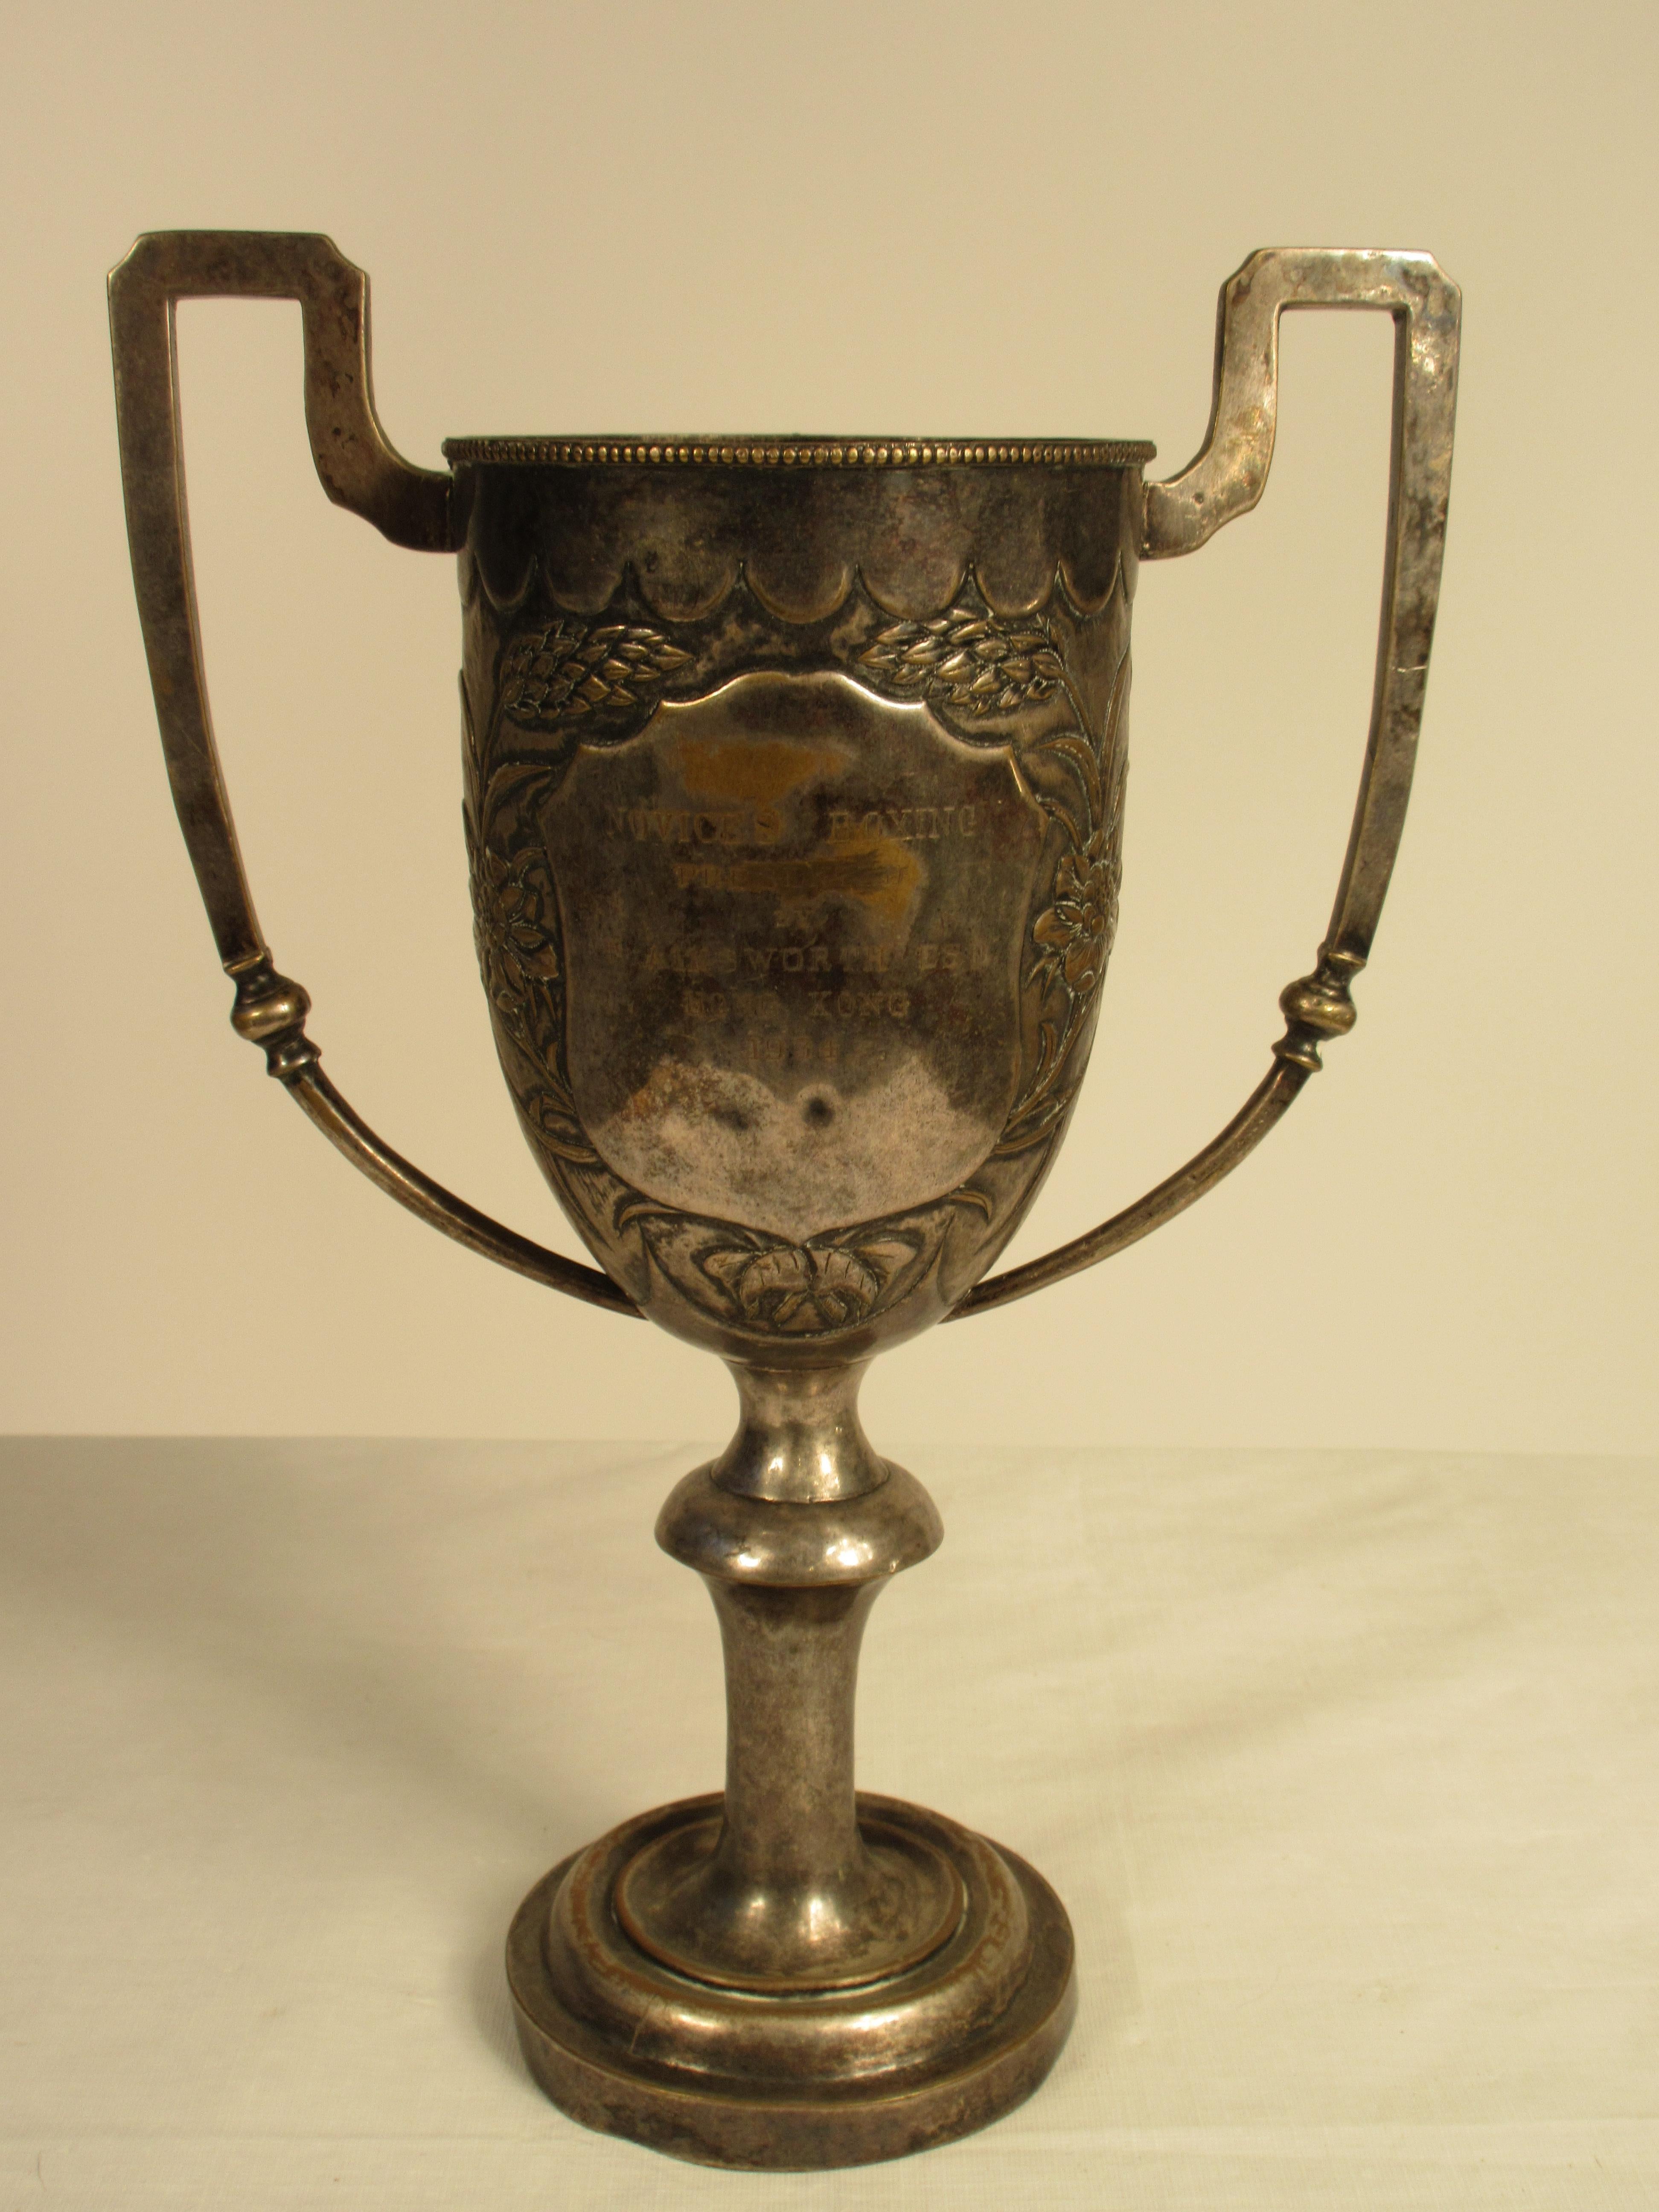 1930s silver plate Cinese boxing trophy.